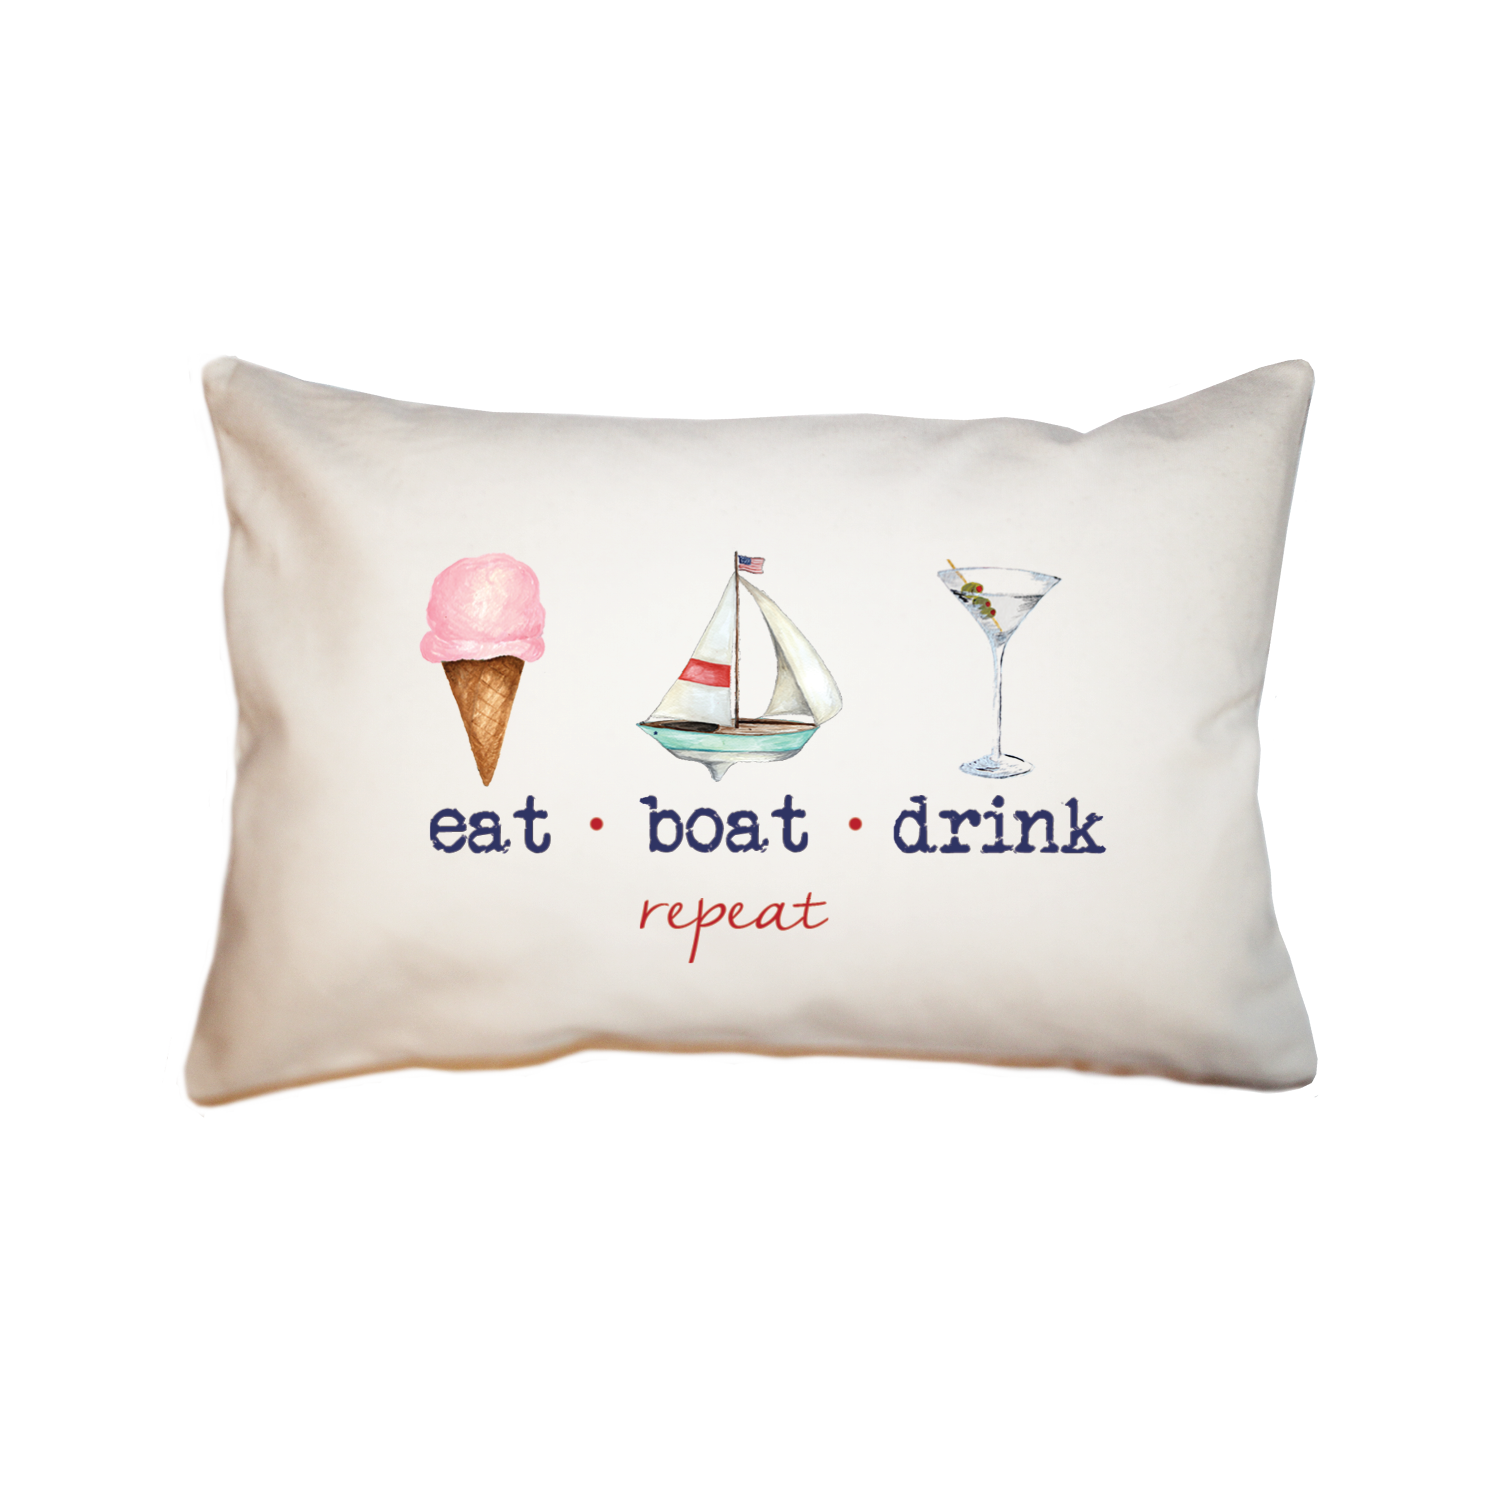 eat boat drink repeat large rectangle pillow